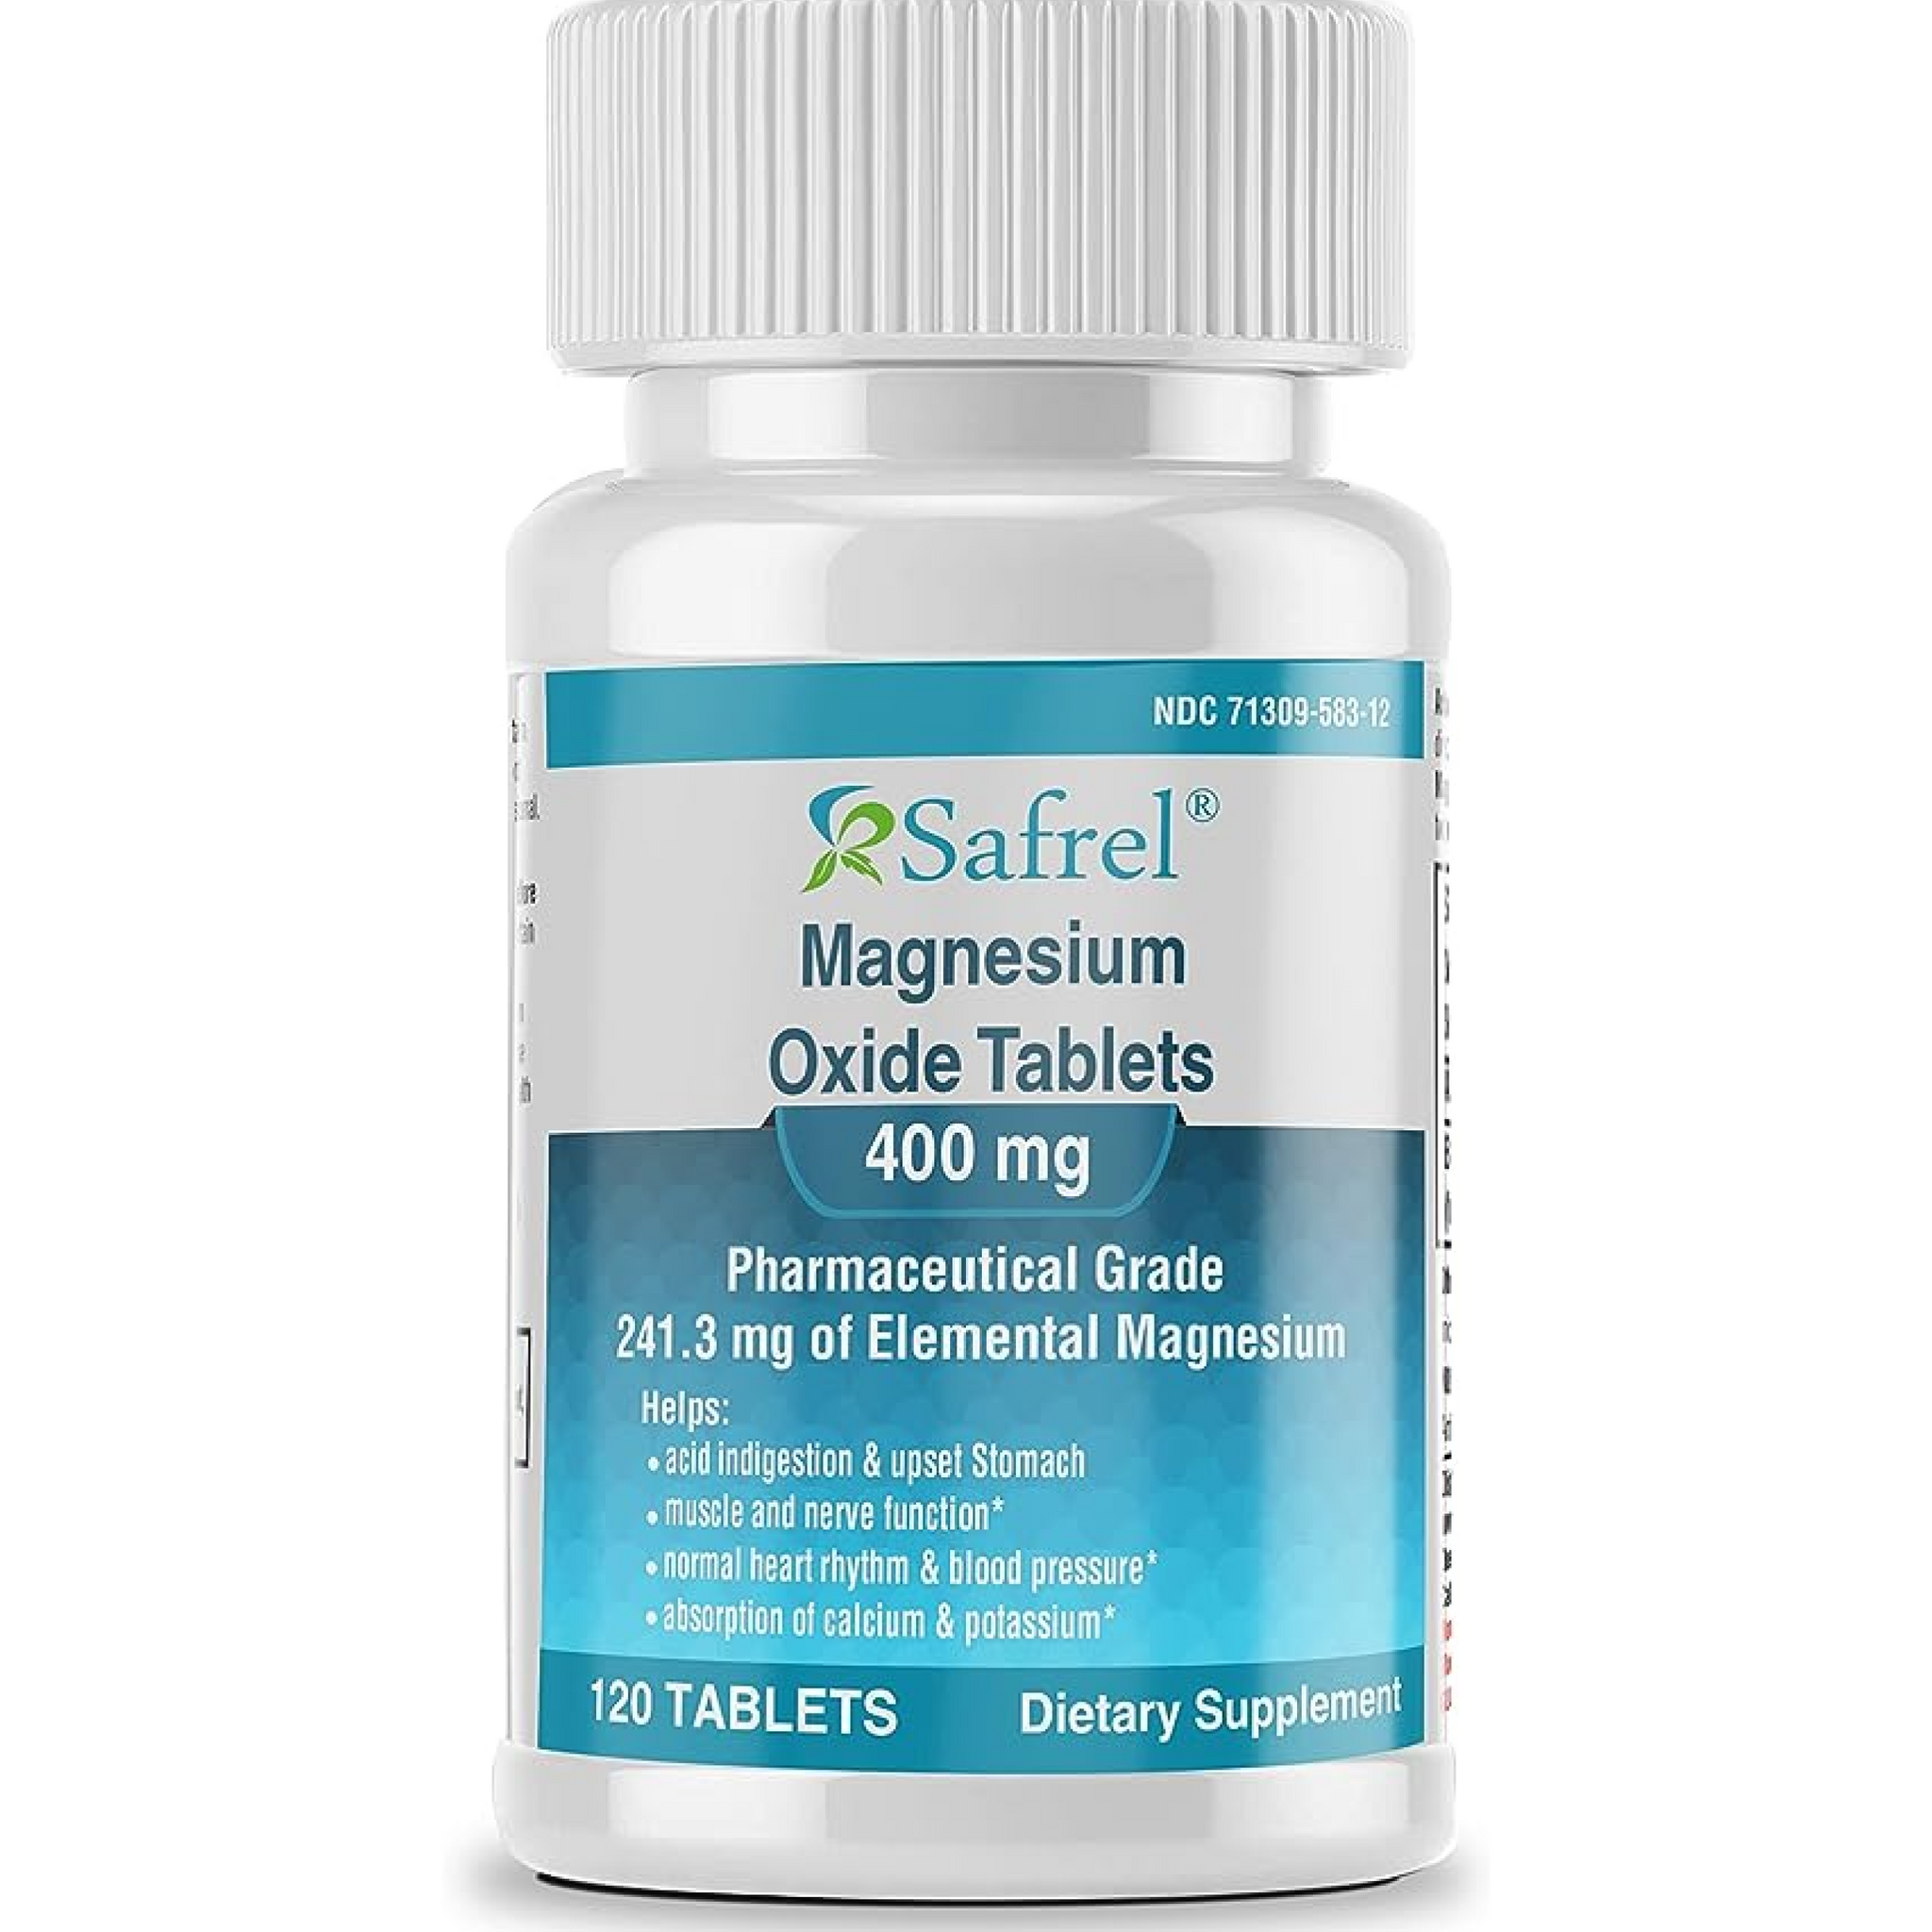 Safrel Magnesium 400mg [High Potency] Supplement – Magnesium Oxide for Immune Support, Muscle Recovery, Leg Cramps, Relaxation - 200 Tablets